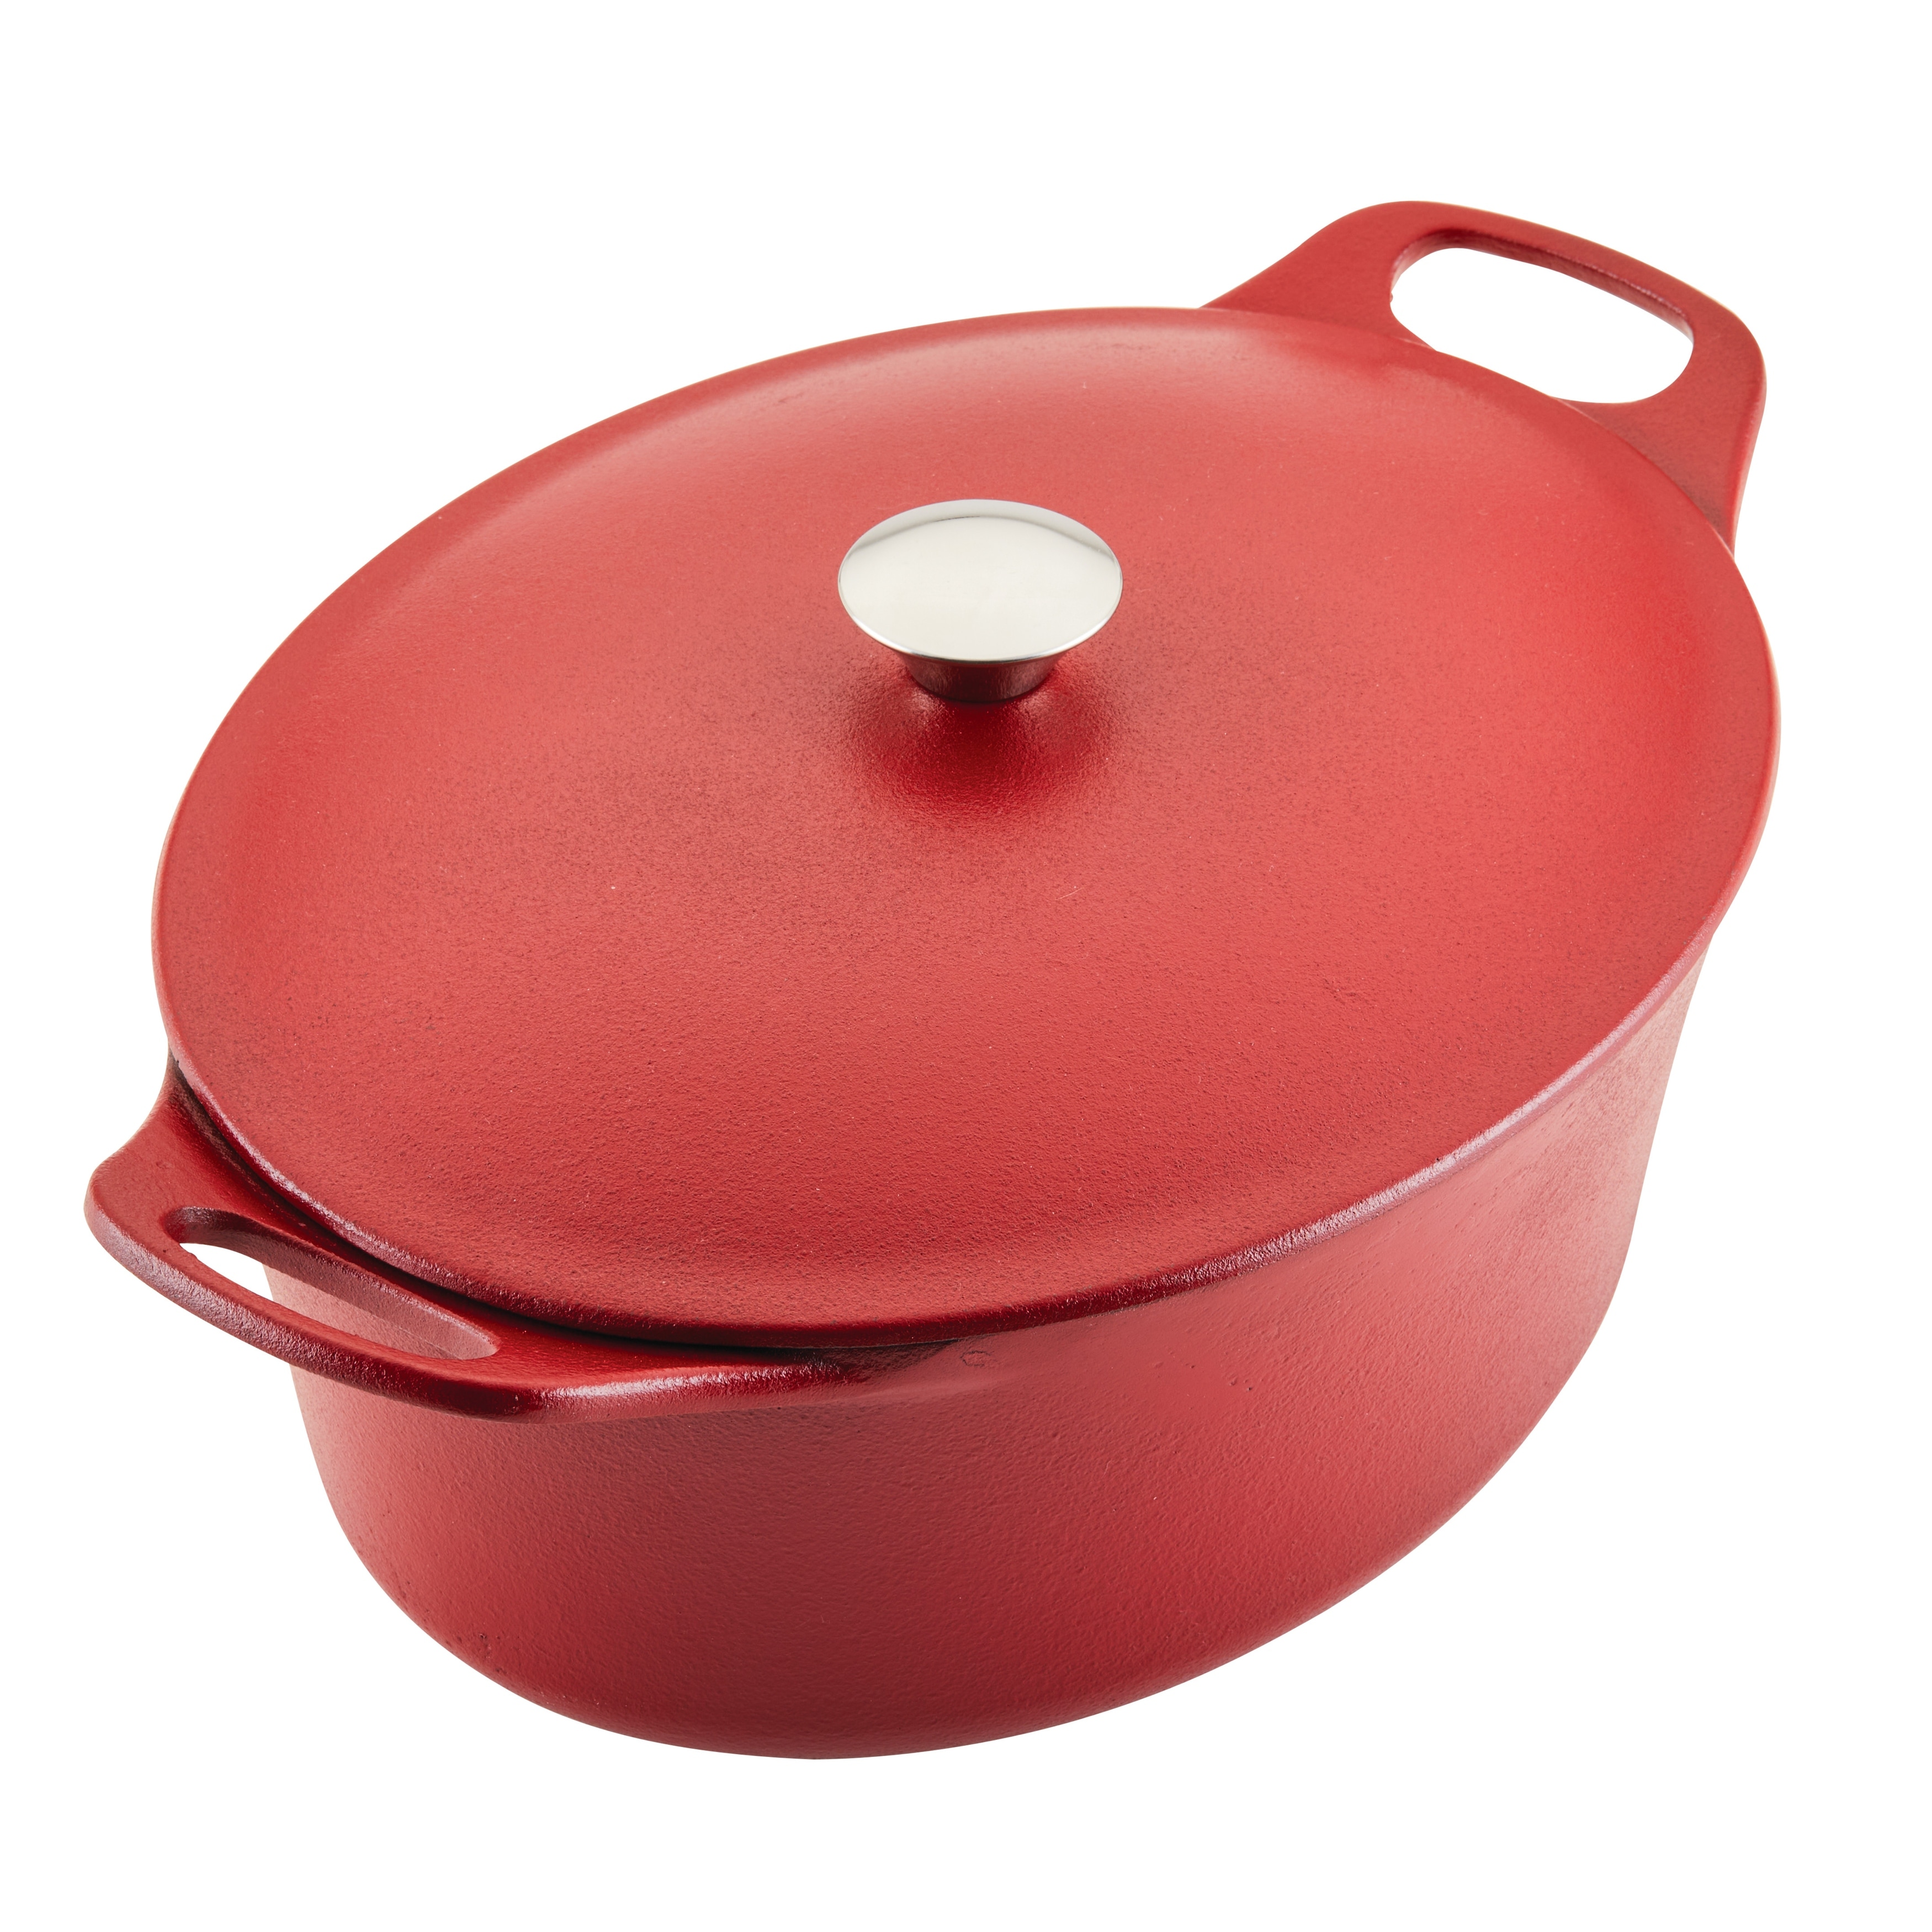 https://ak1.ostkcdn.com/images/products/is/images/direct/d5efa7abff1247427554fe85cd2047664a55604f/Rachael-Ray-NITRO-Cast-Iron-Dutch-Oven%2C-6.5-Quart%2C-Agave-Blue.jpg